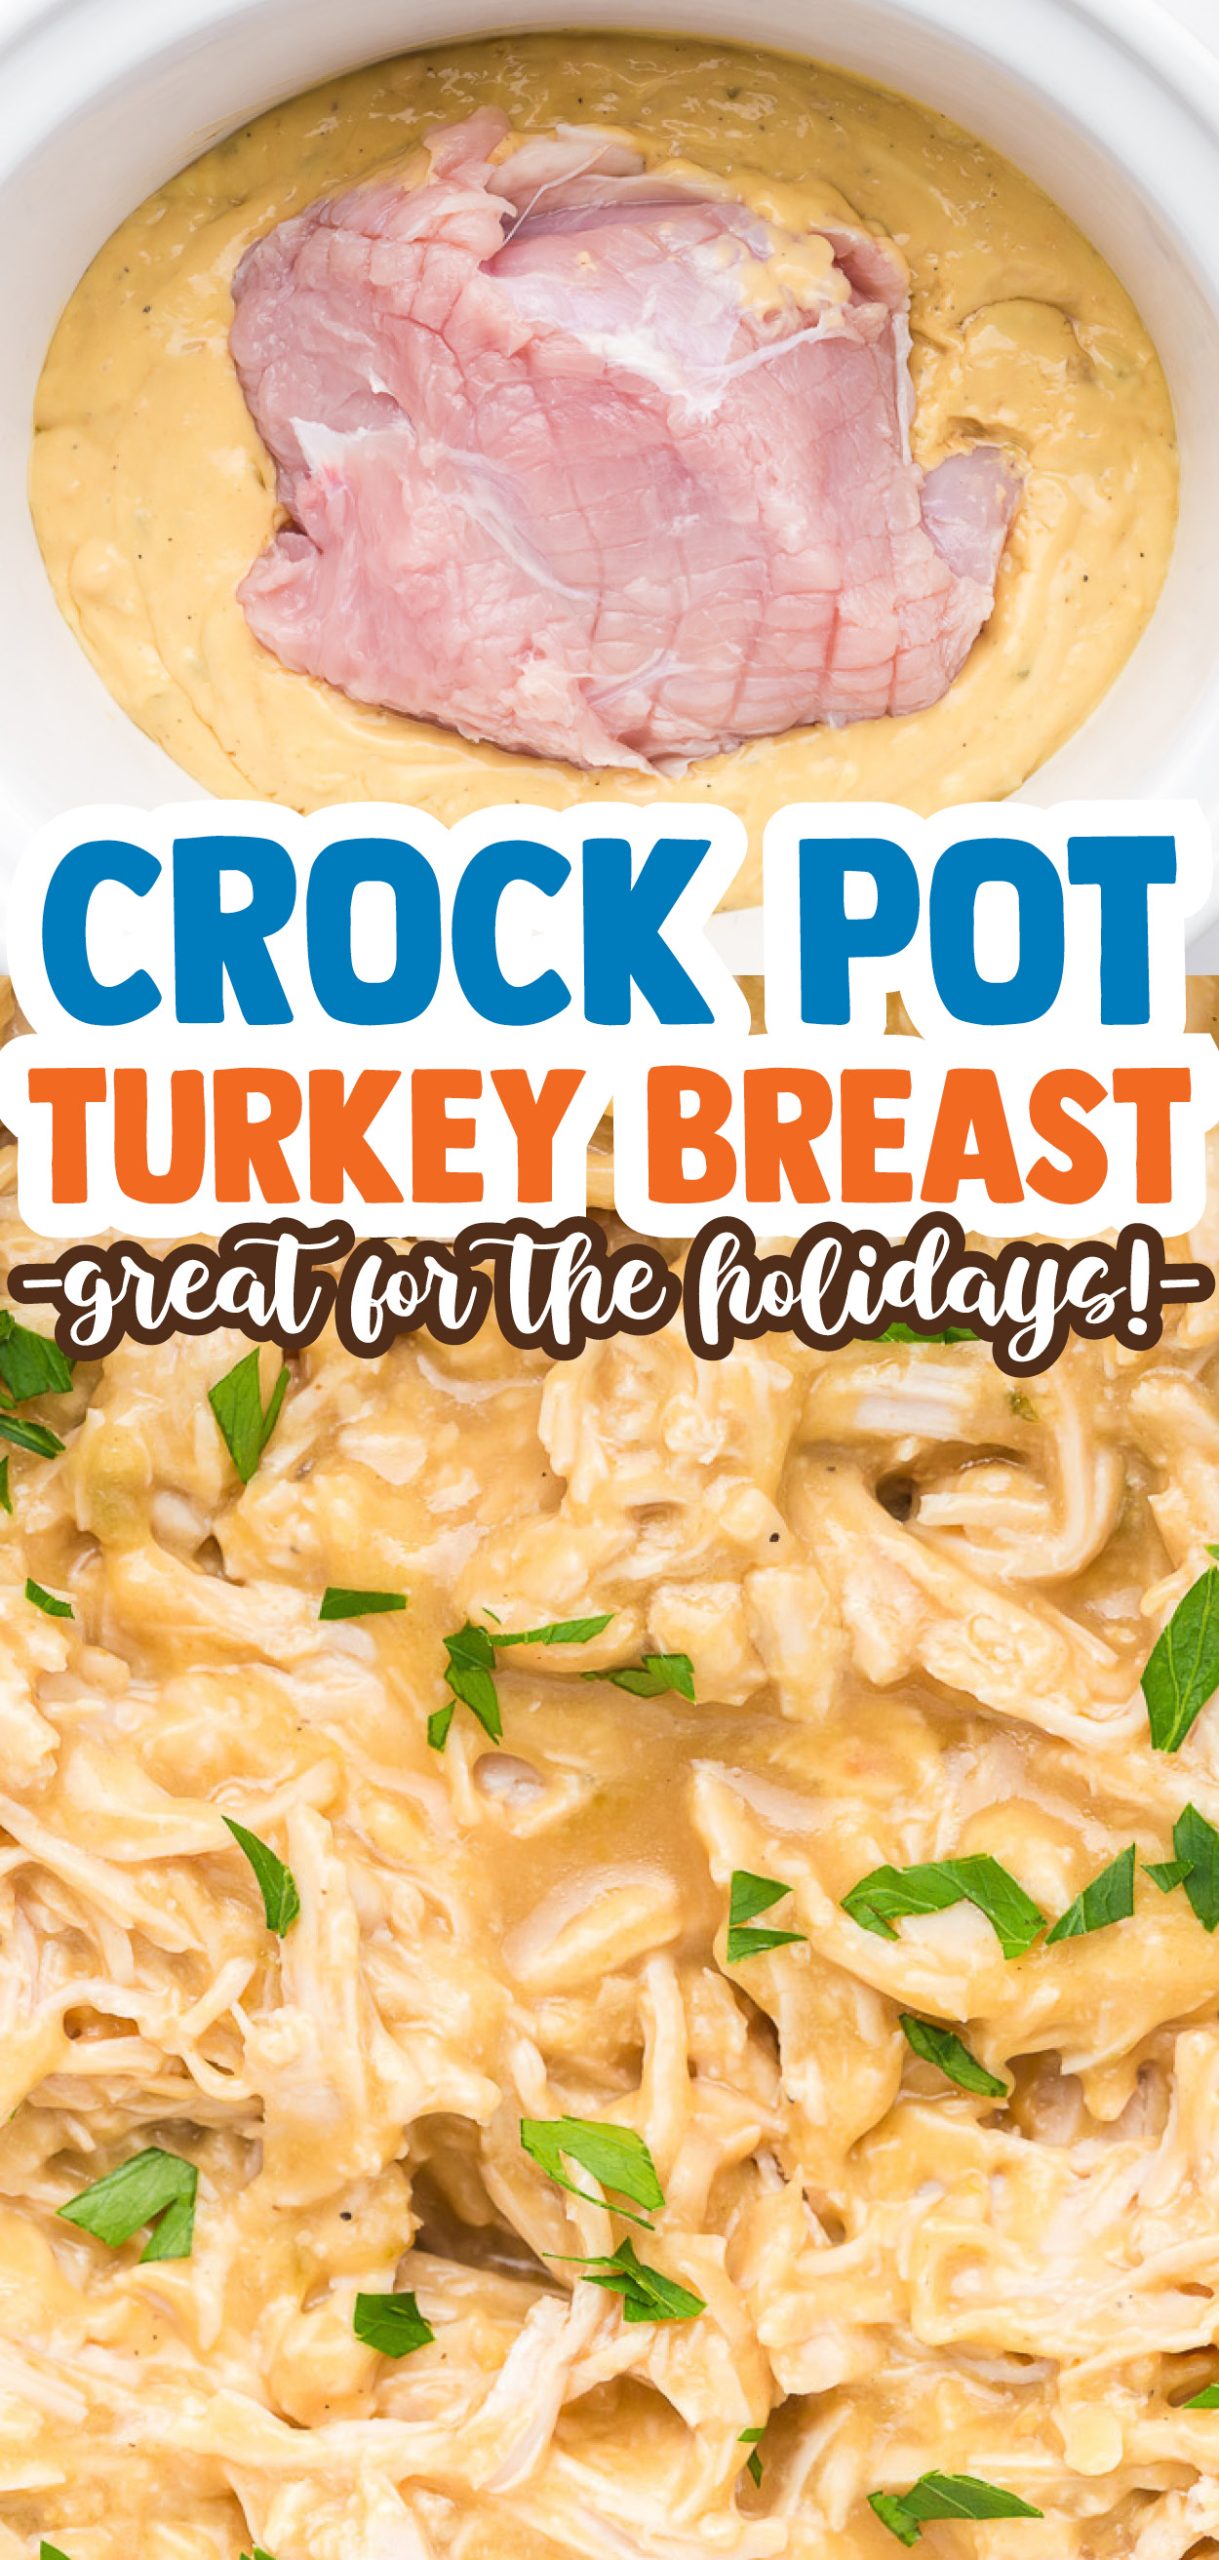 Shredded Crock Pot Turkey Breasts in a delicious gravy! This slow cooker turkey breast recipe is the easiest and tastiest way to cook a turkey breast. No need for a big turkey at Thanksgiving? Try this!